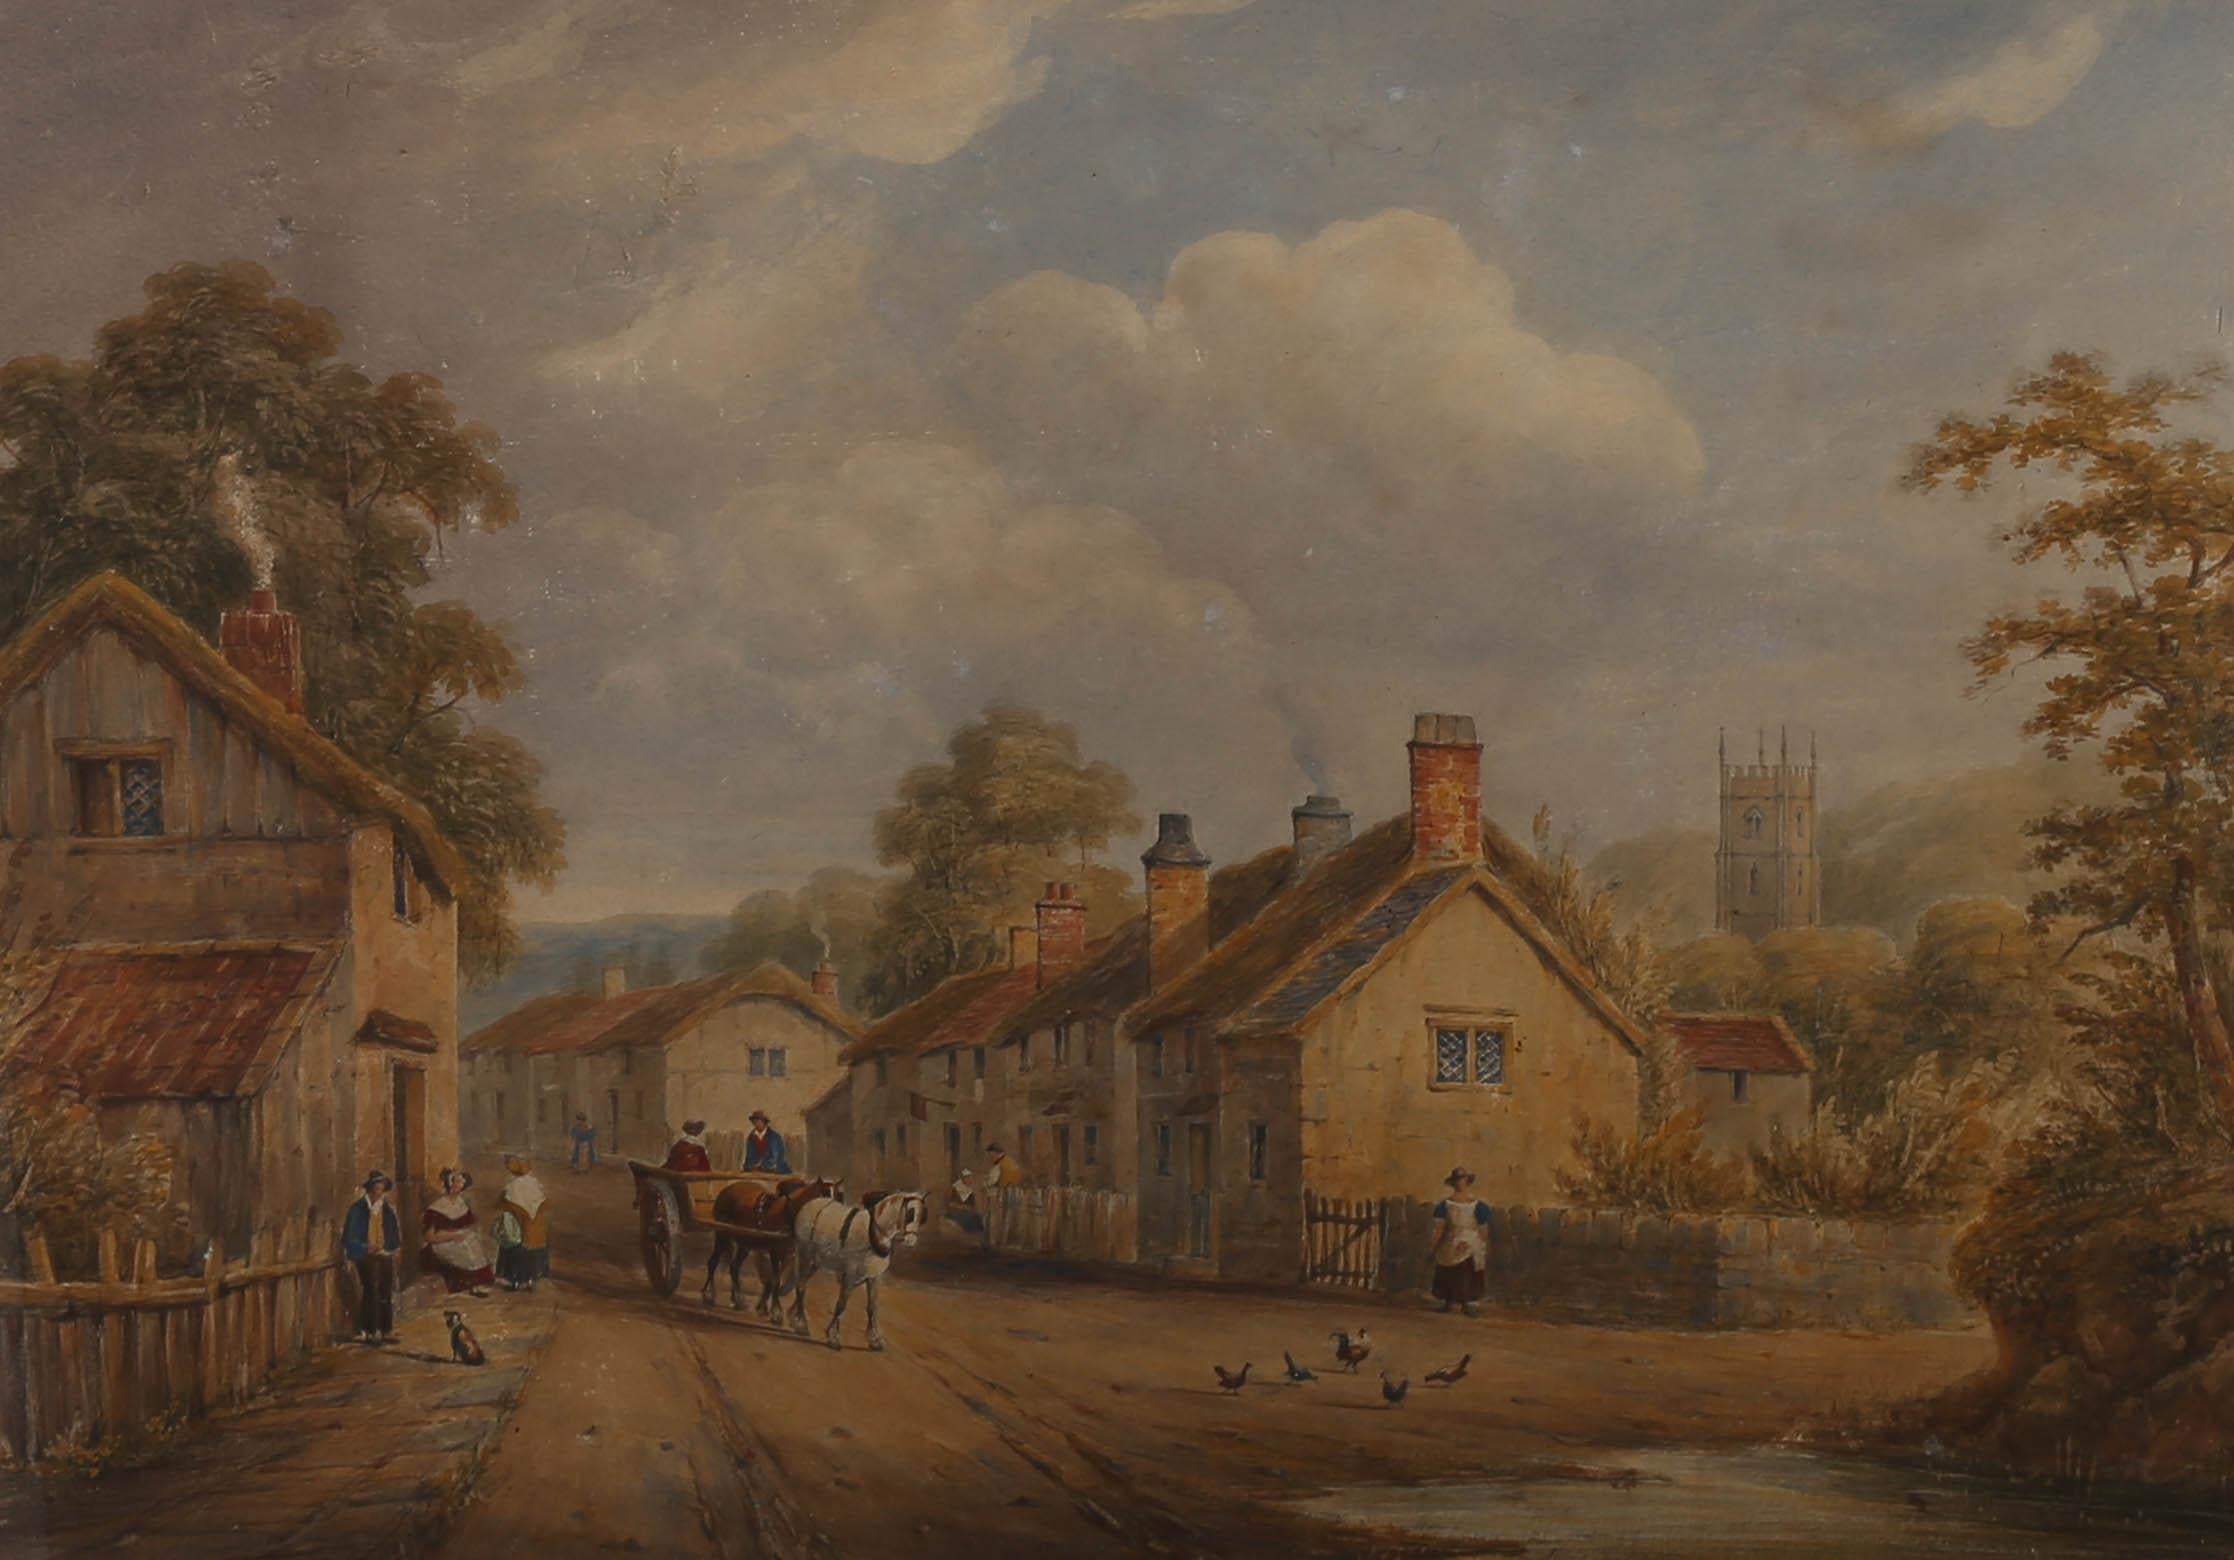 A large mid 19th century watercolour depicting a charming thatched cottage village scene with church. Figures can be seen going about their daily errands. Presented in a large glazed gilt frame with white card mount. On watercolour paper.
